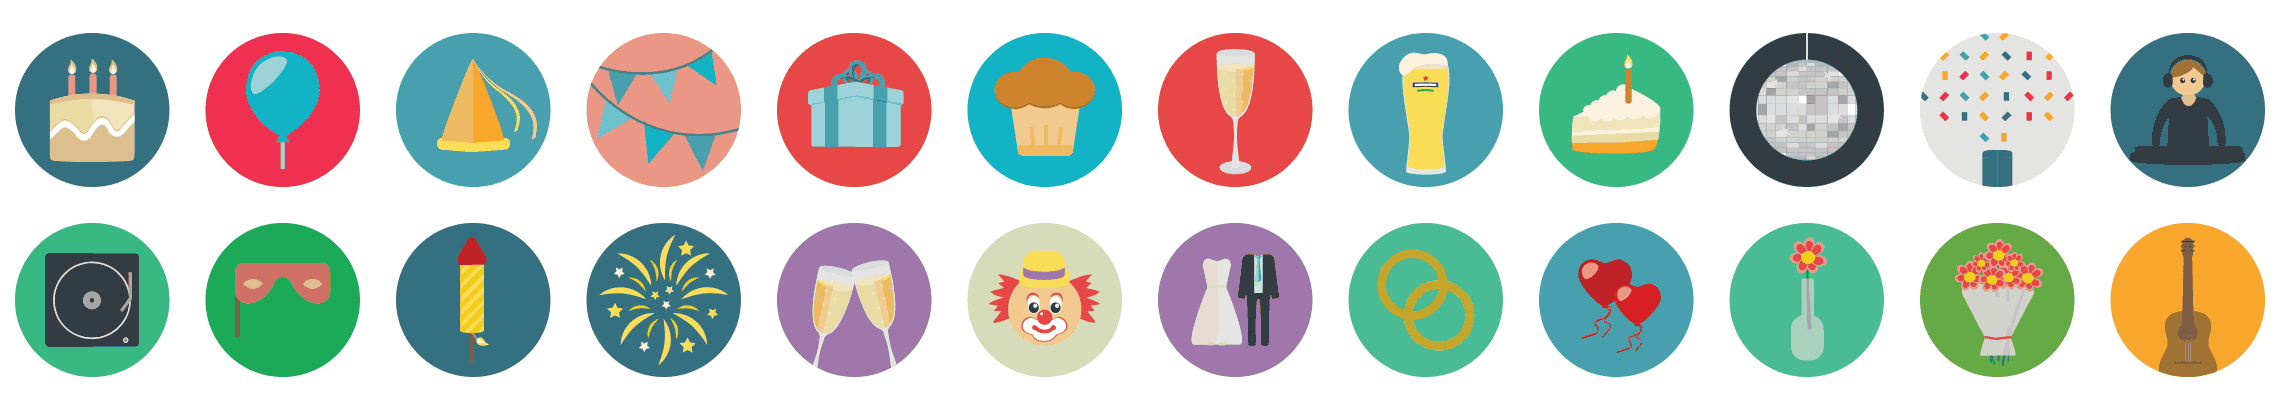 party-flat-icons-vol-1-preview